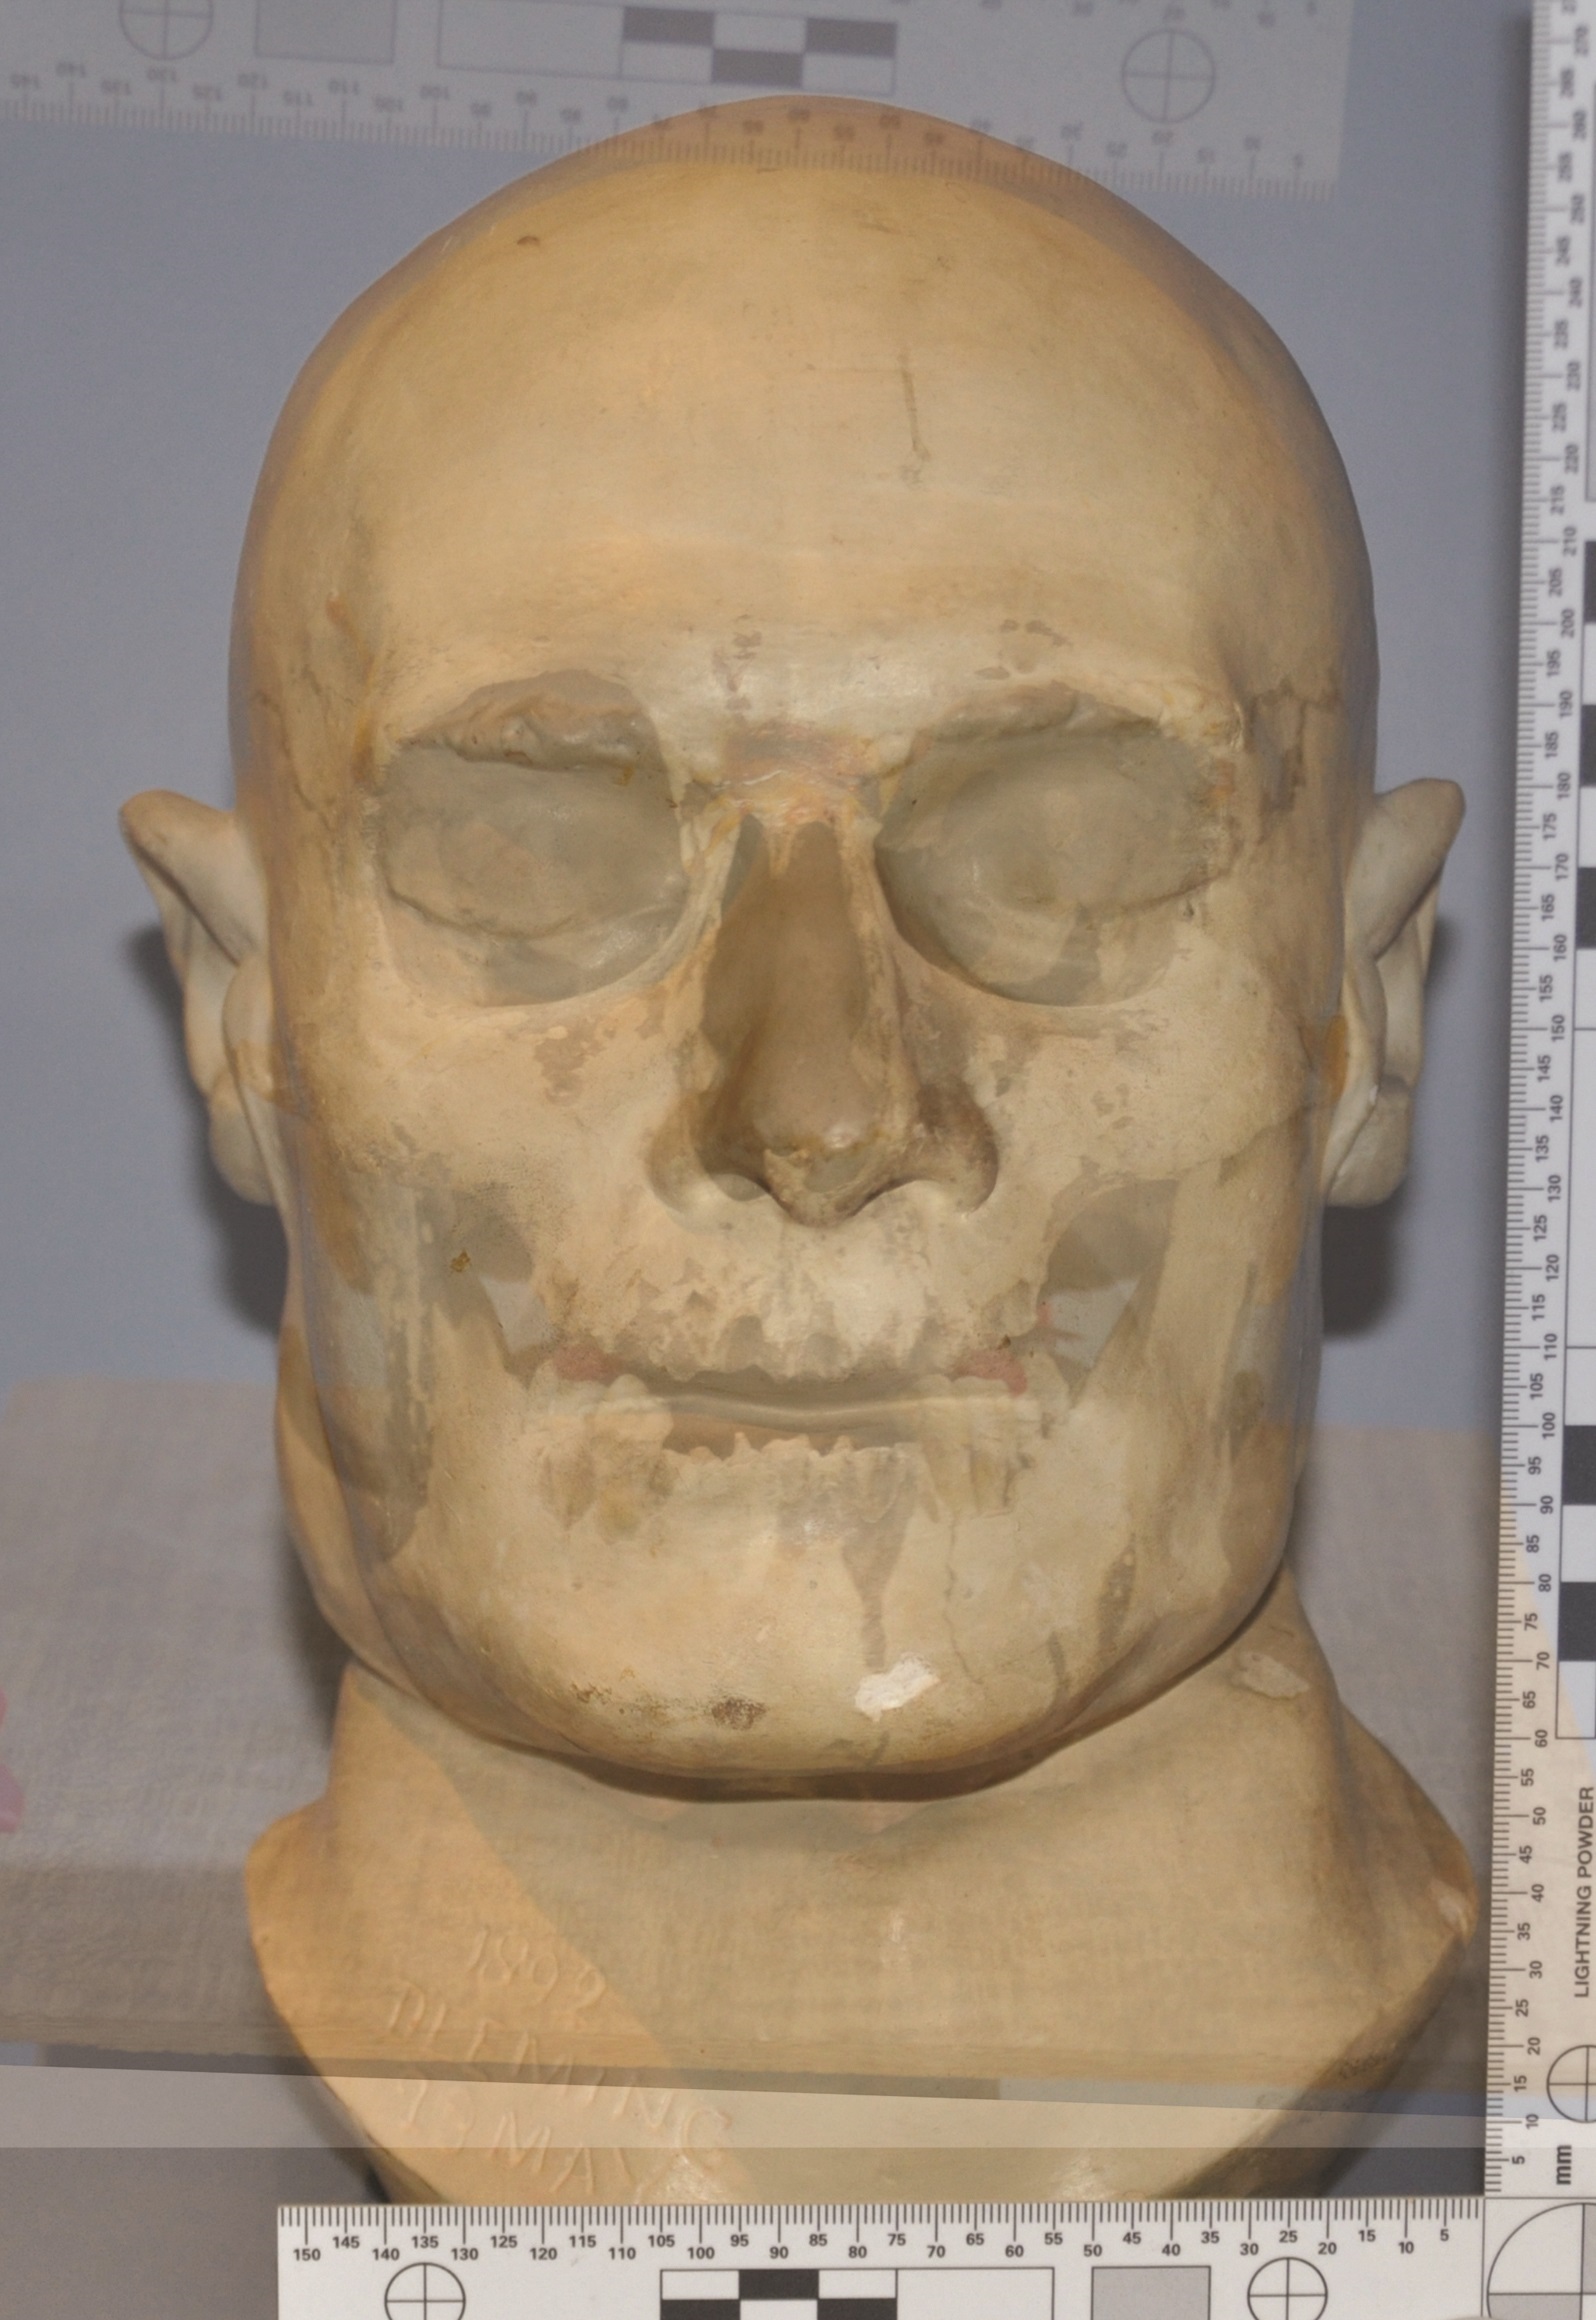 Death mask of Ned Kelly